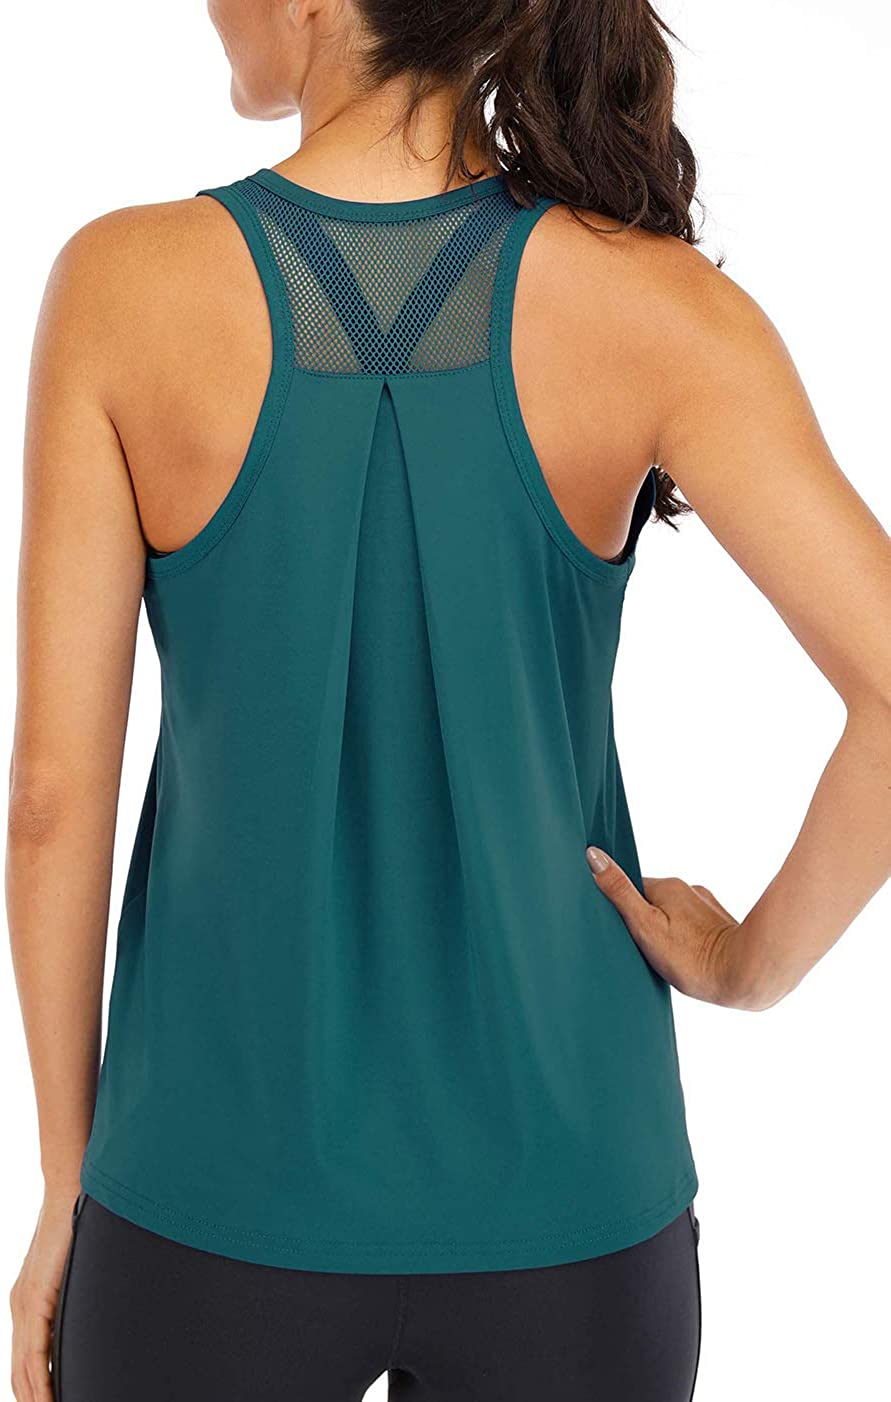 ICTIVE Yoga Tops for Women Loose fit Workout Tank Tops for Women